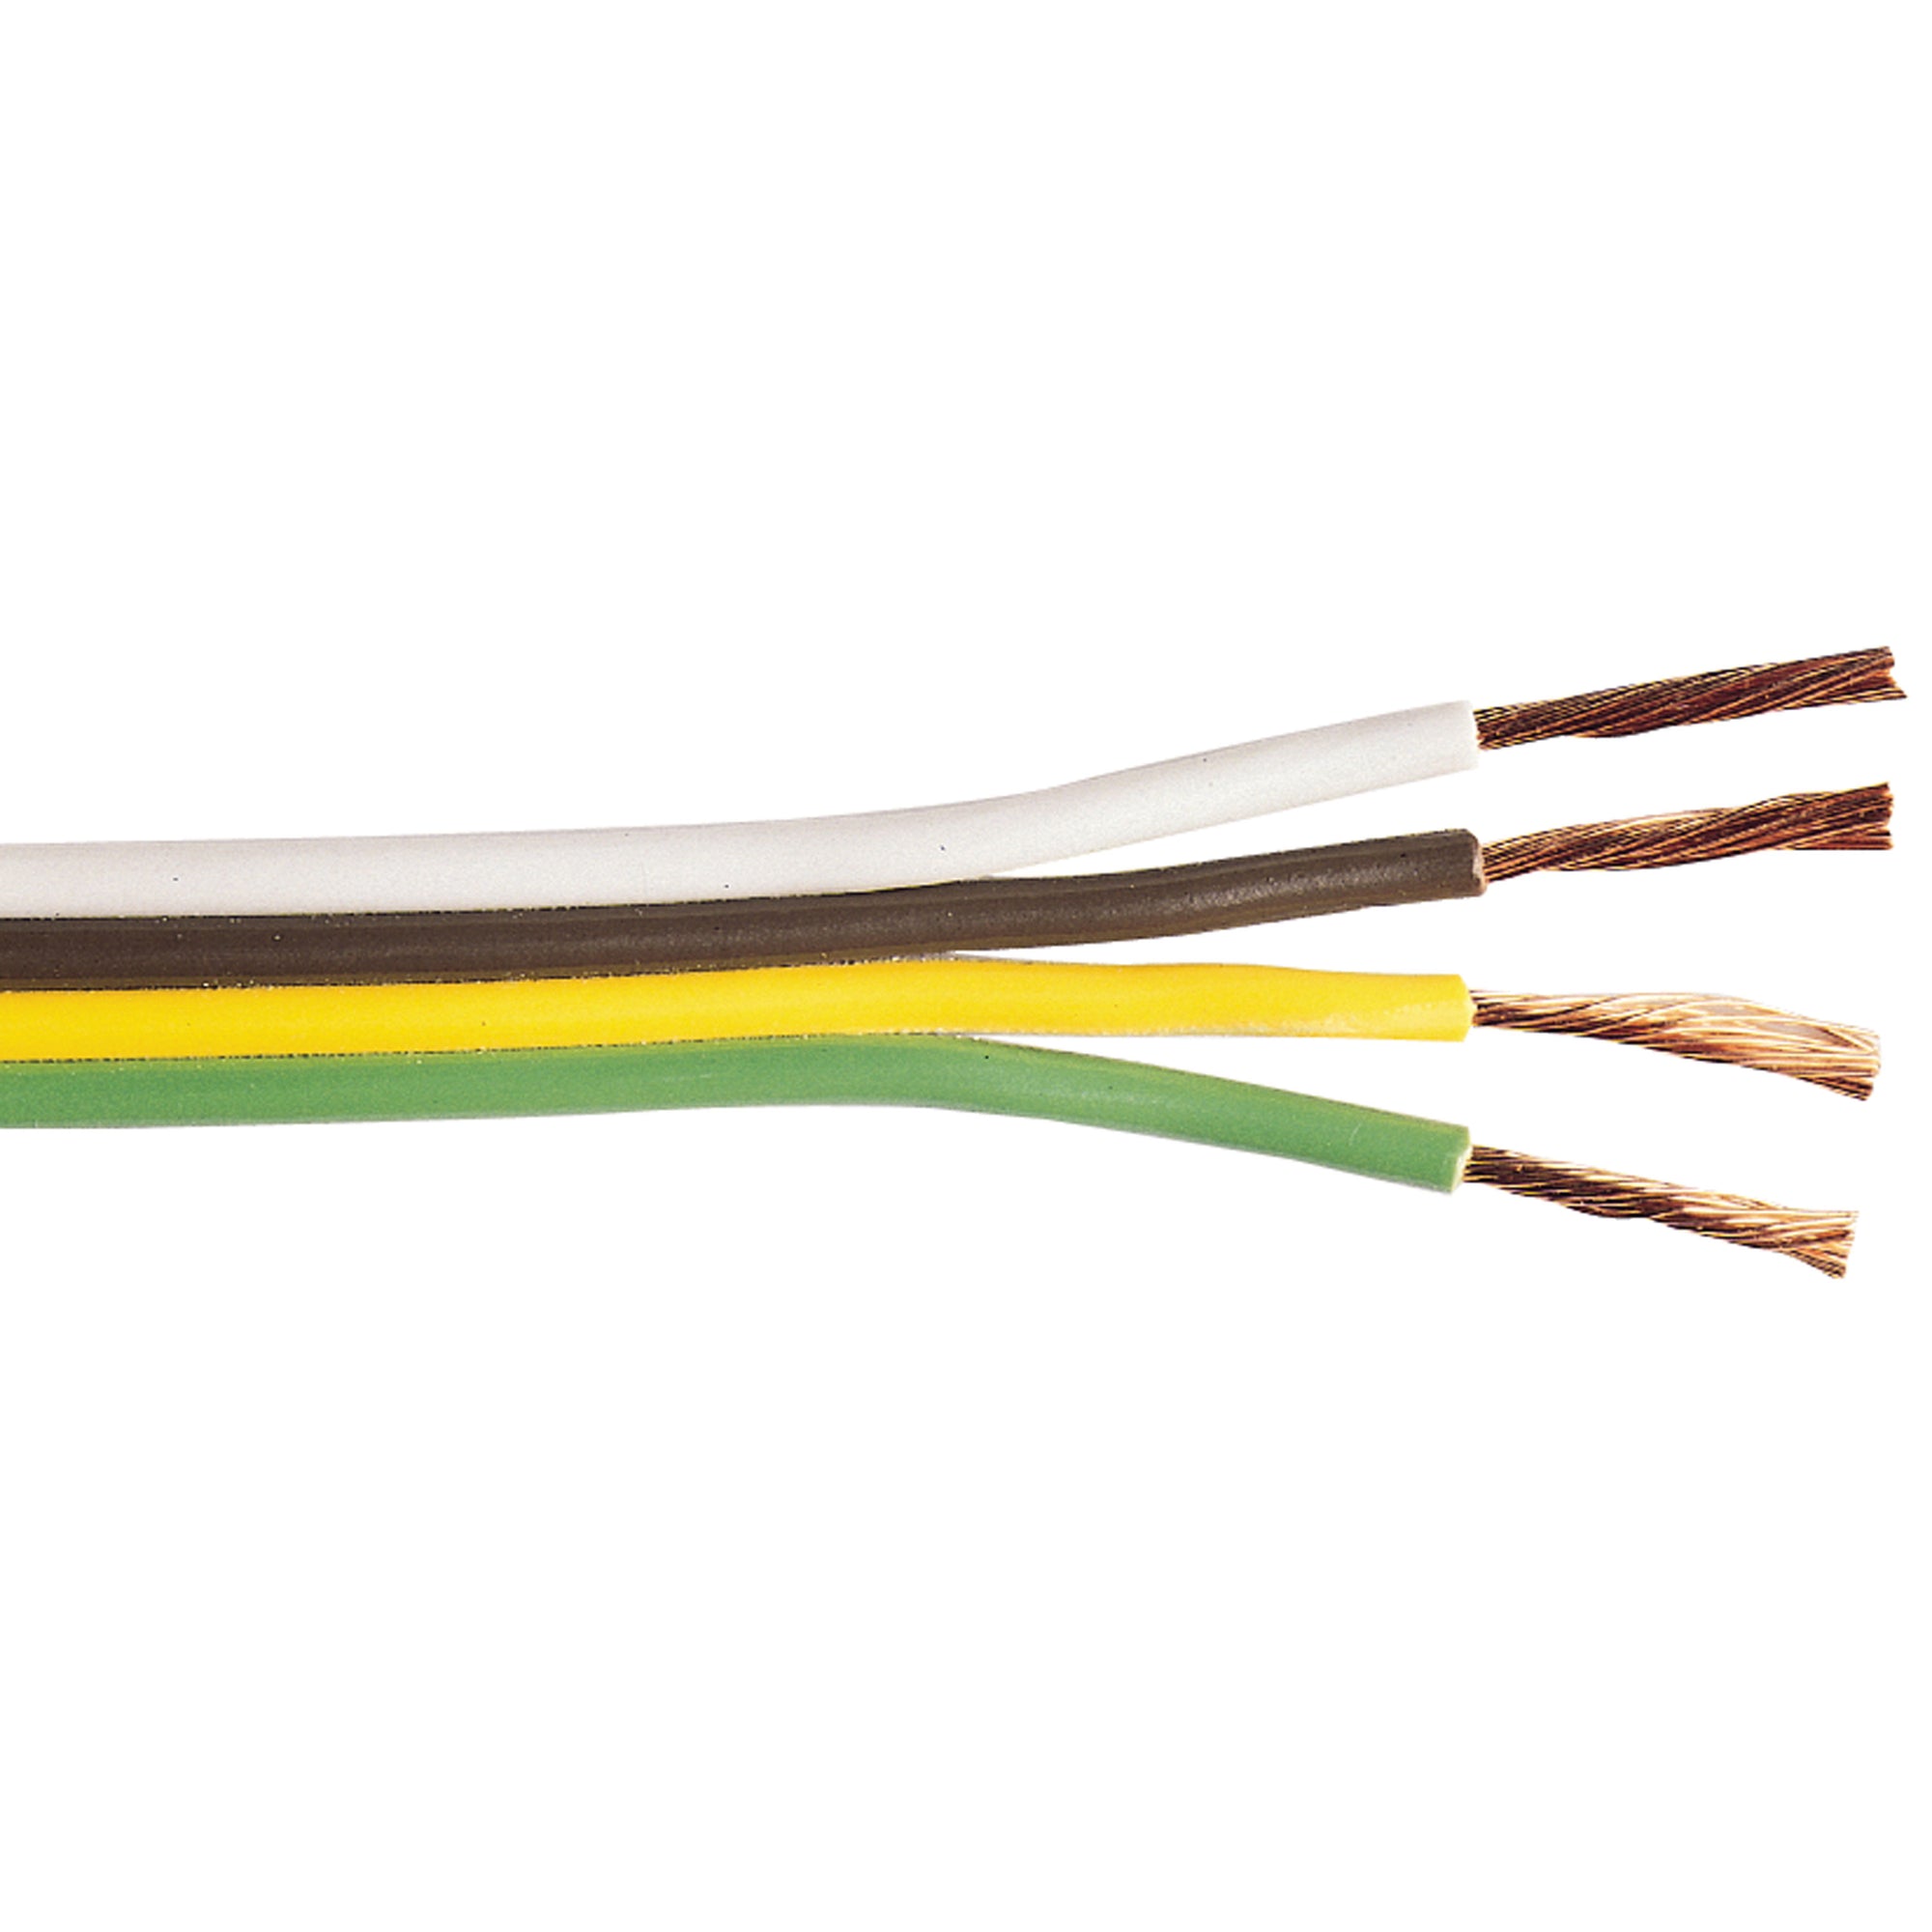 Quick Cable 232202-500 Ribbon Wire - 500' 14 Gauge, 4 Wire